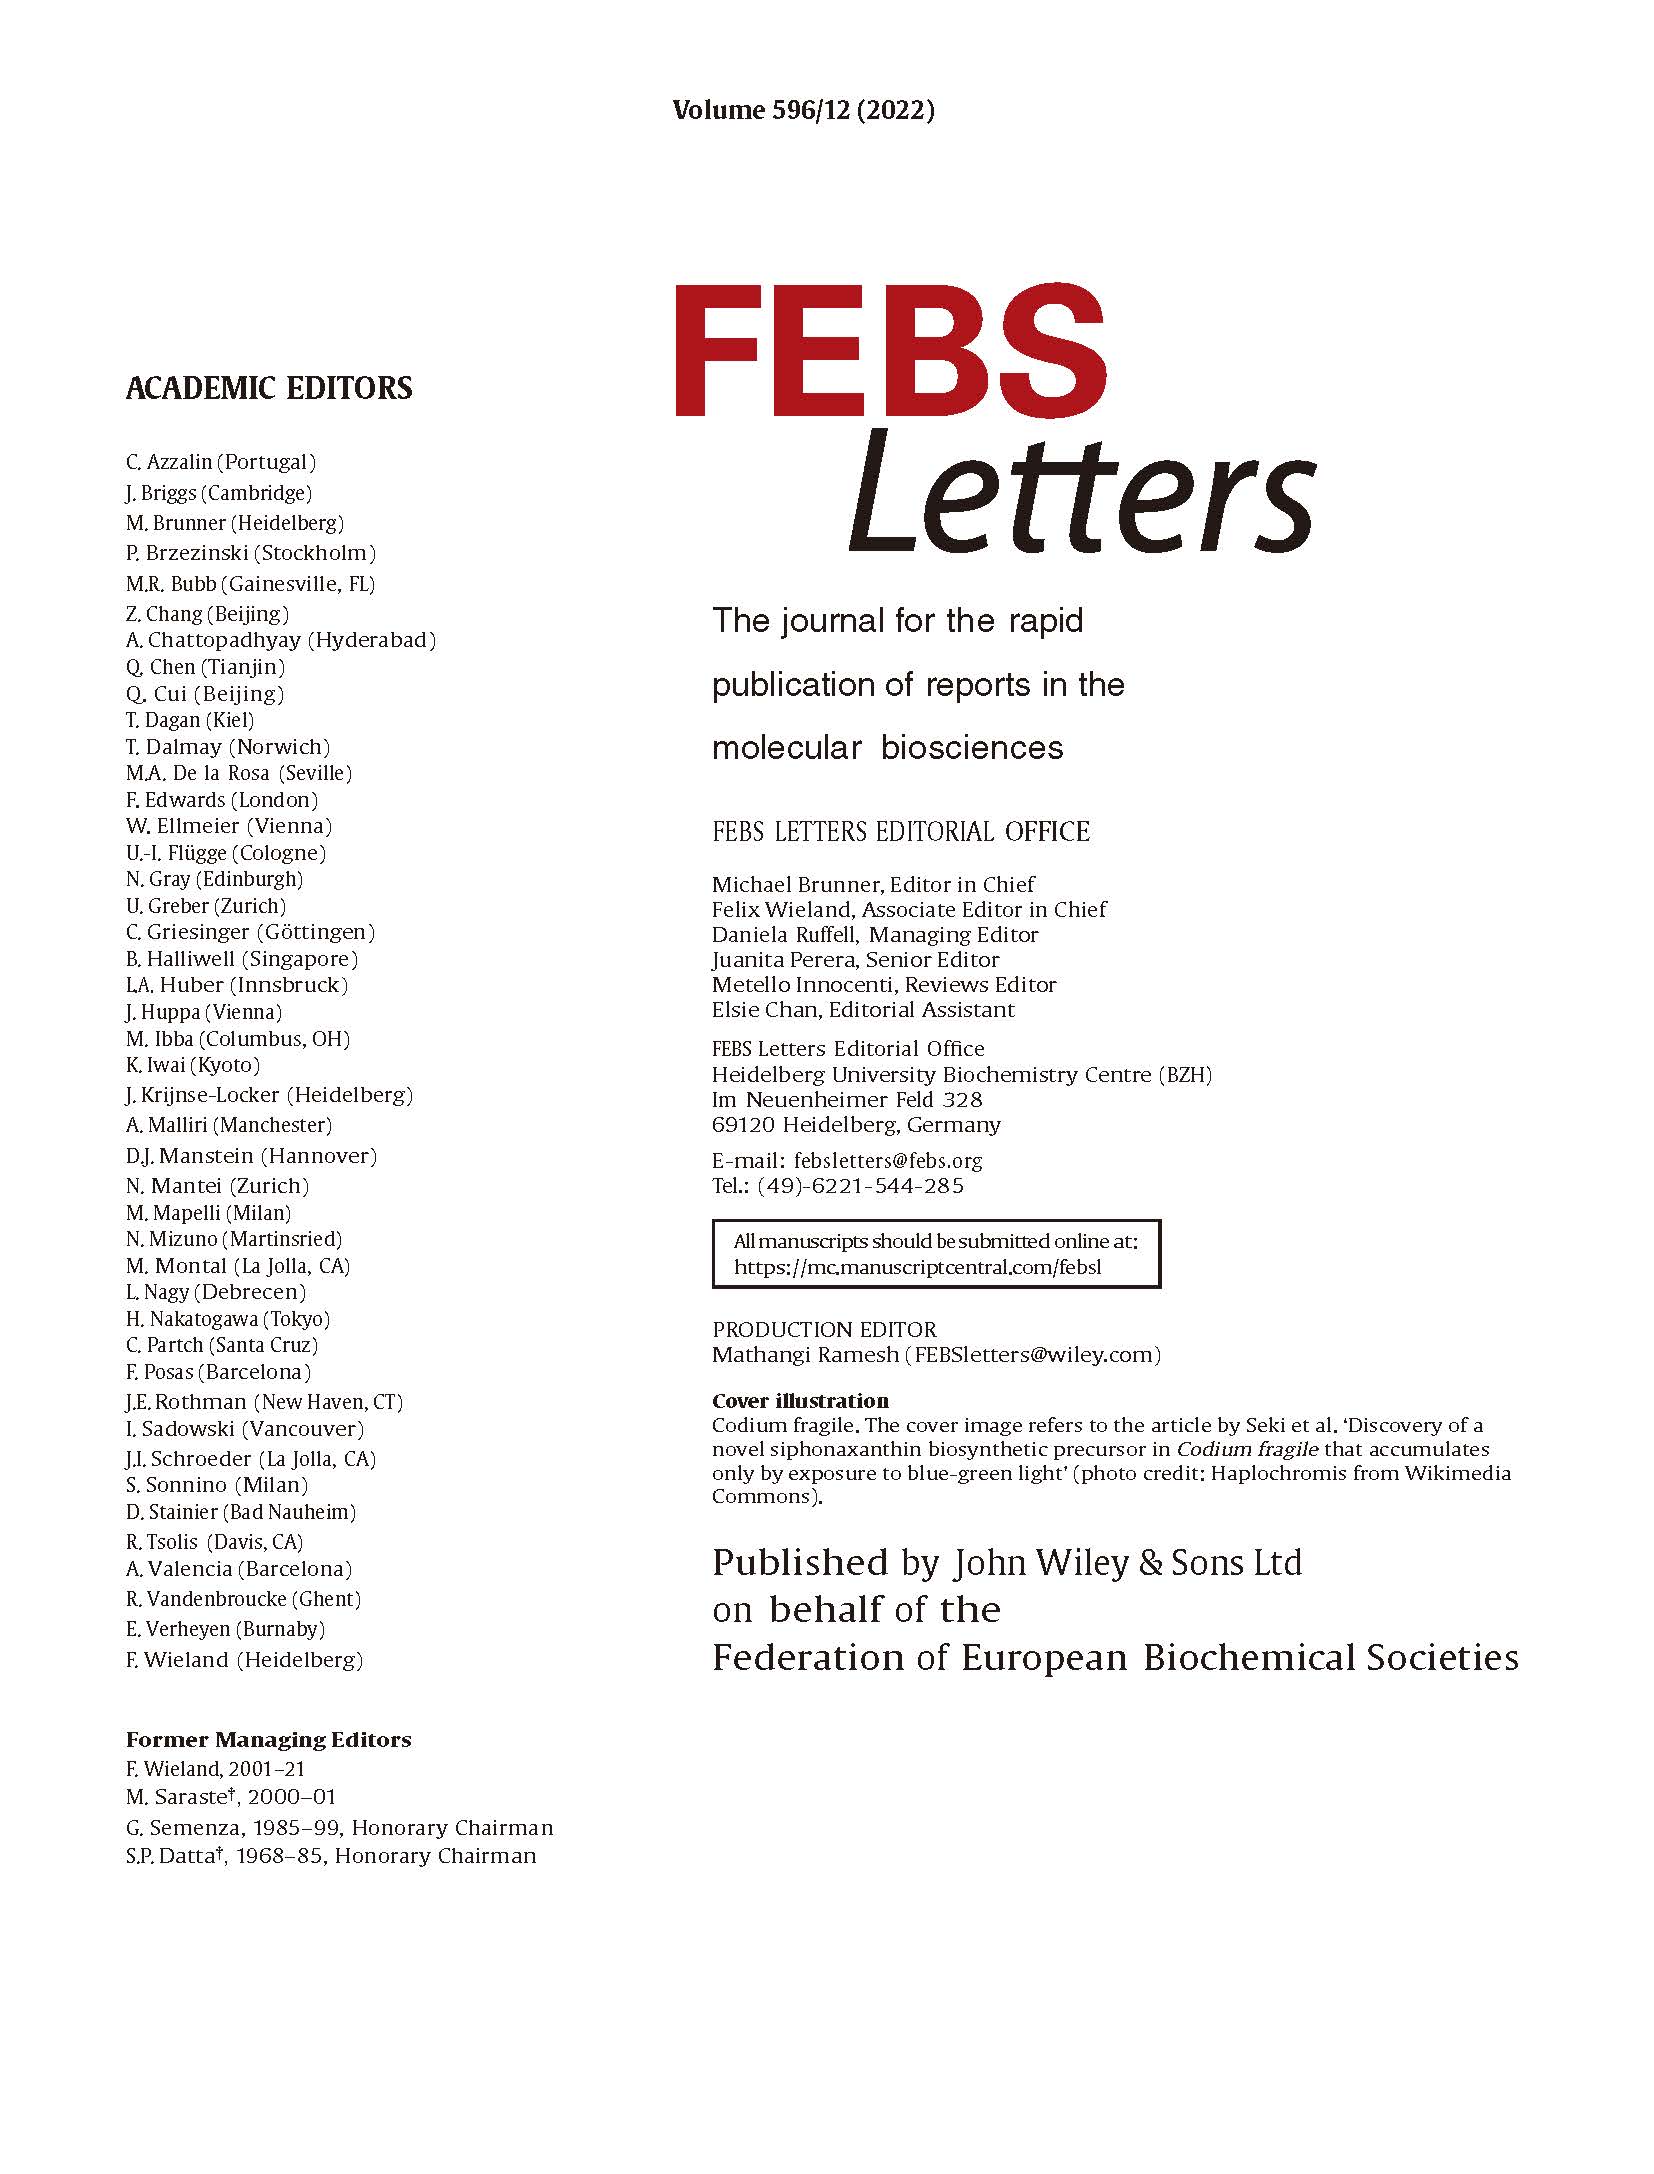 FEBS_Letters-2022-FrontCover2